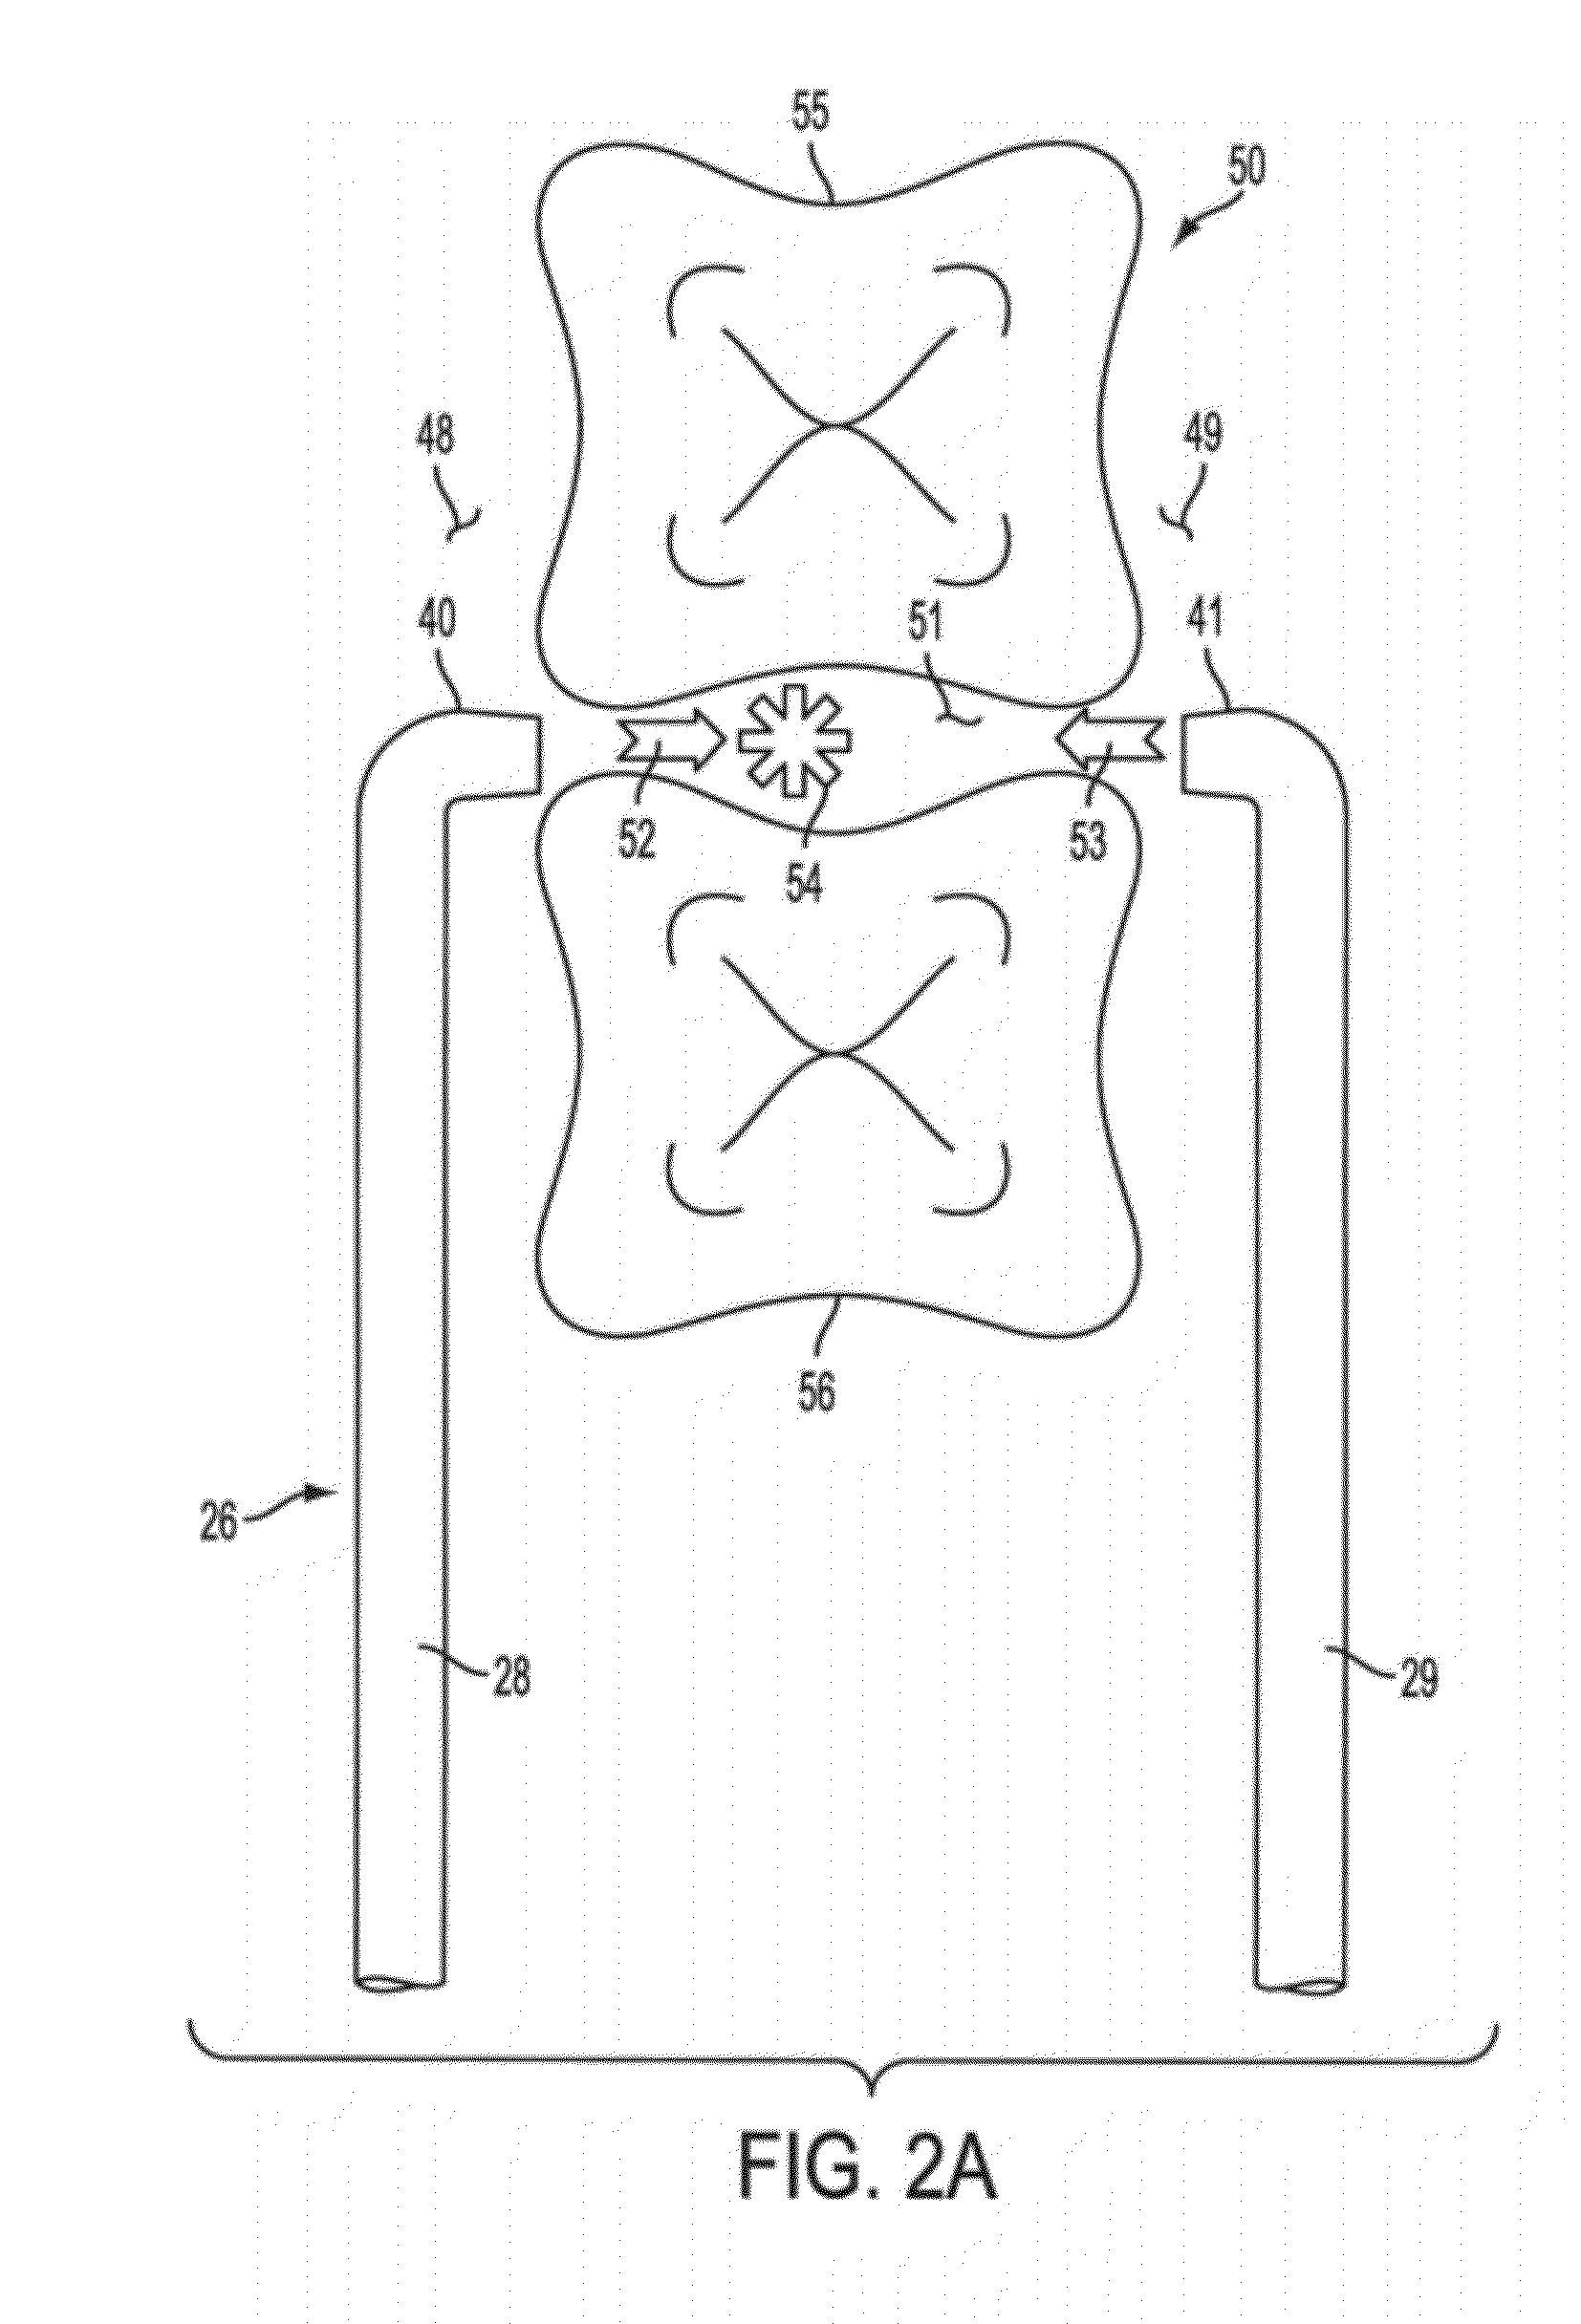 Oral Irrigation and/or Brushing Devices and/or Methods